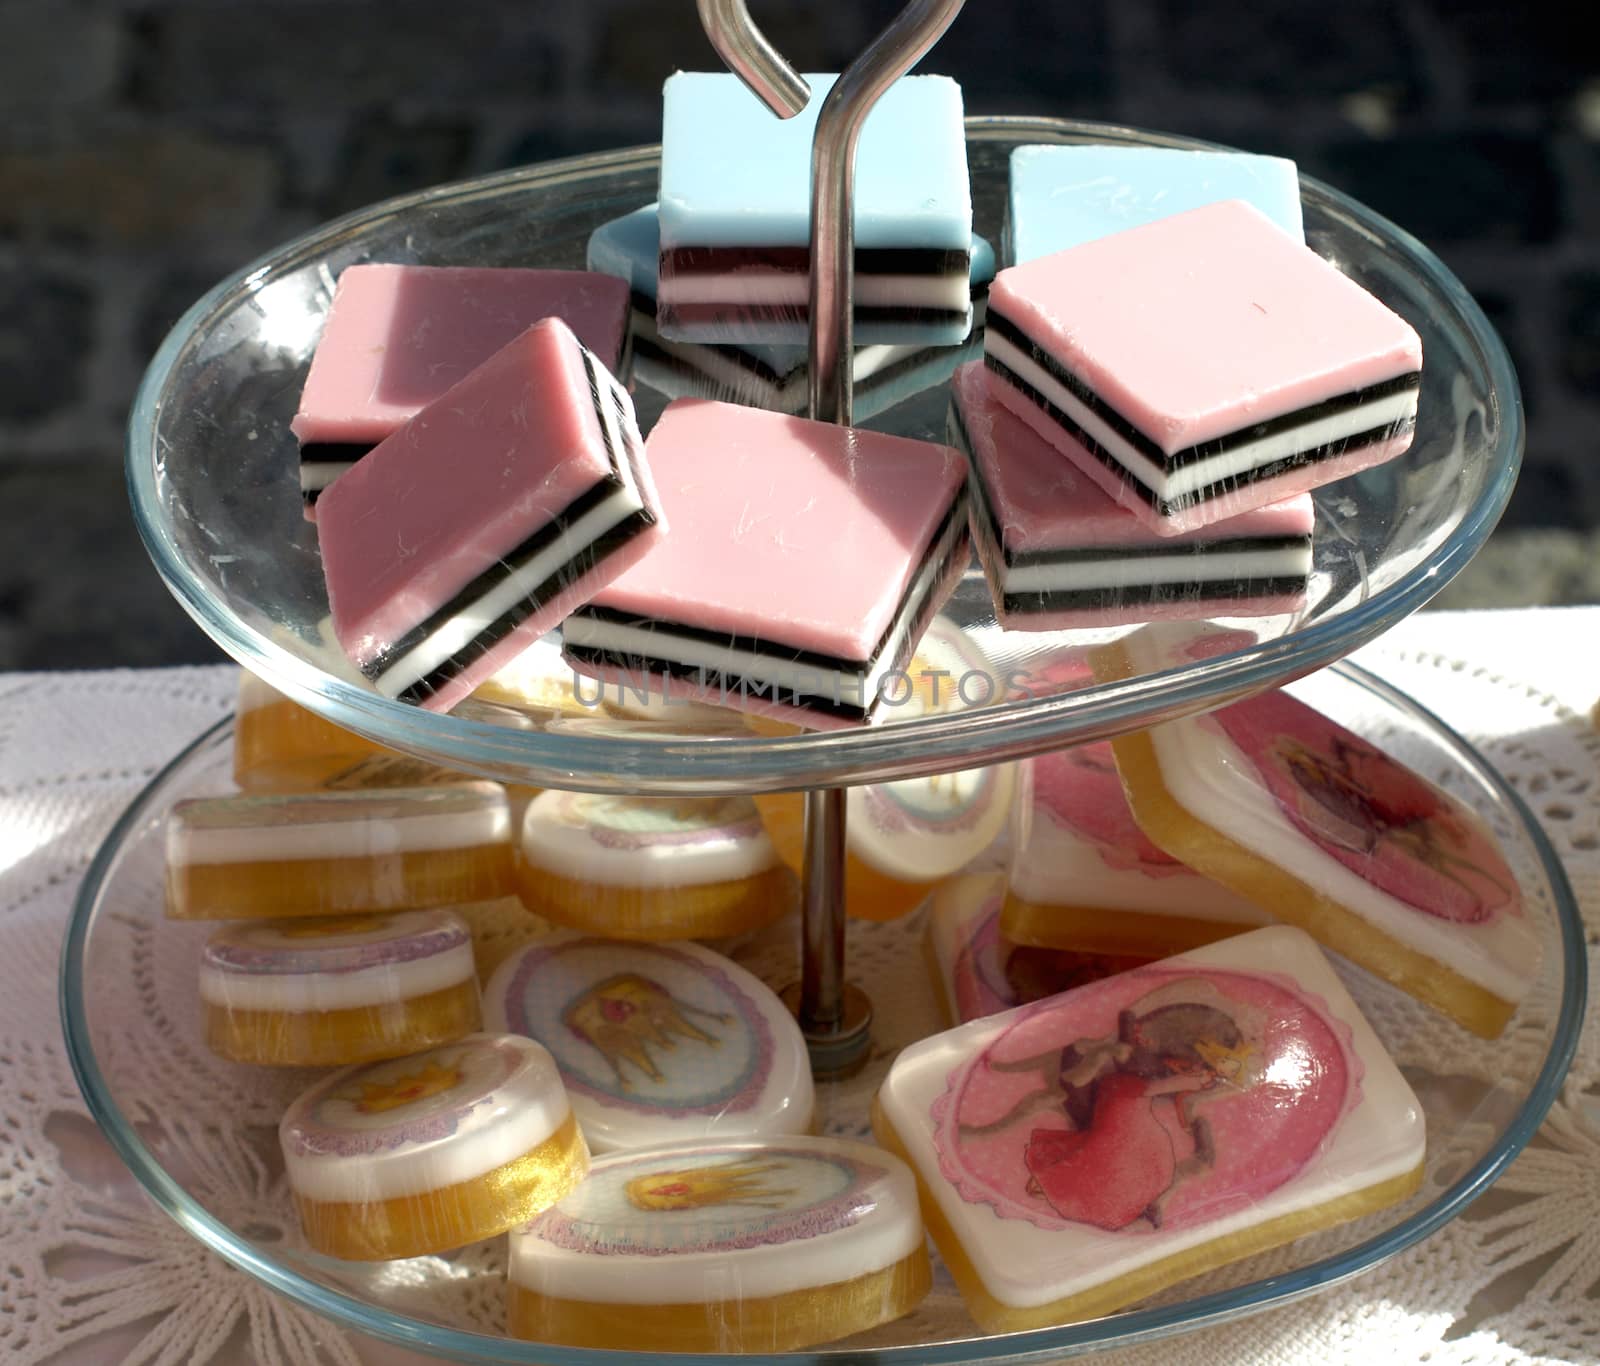 Decorative soaps for gift